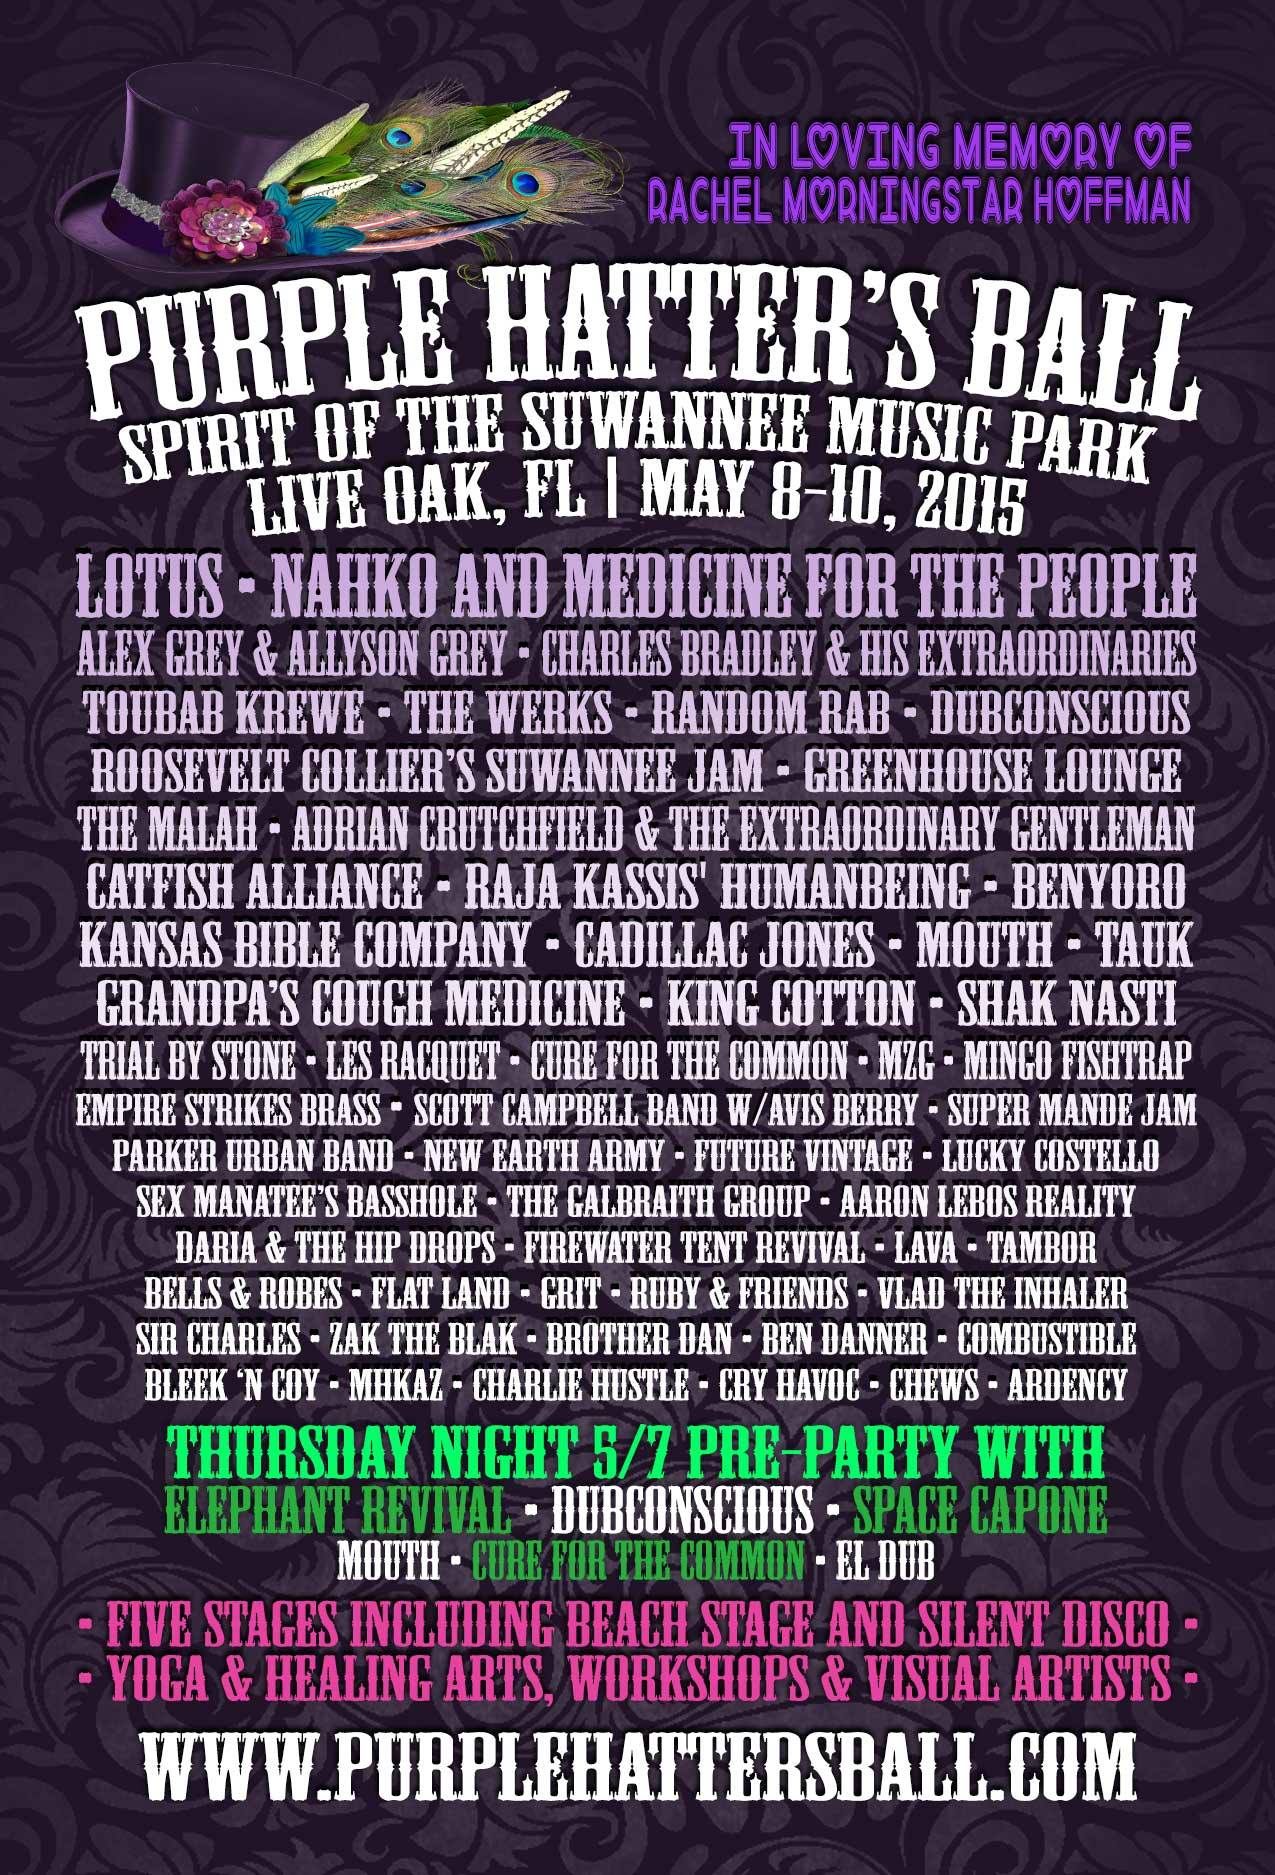 Purple Hatter’s Ball Adds TAUK and Mingo Fishtrap, Releases Schedule and Live Art Artist Roster